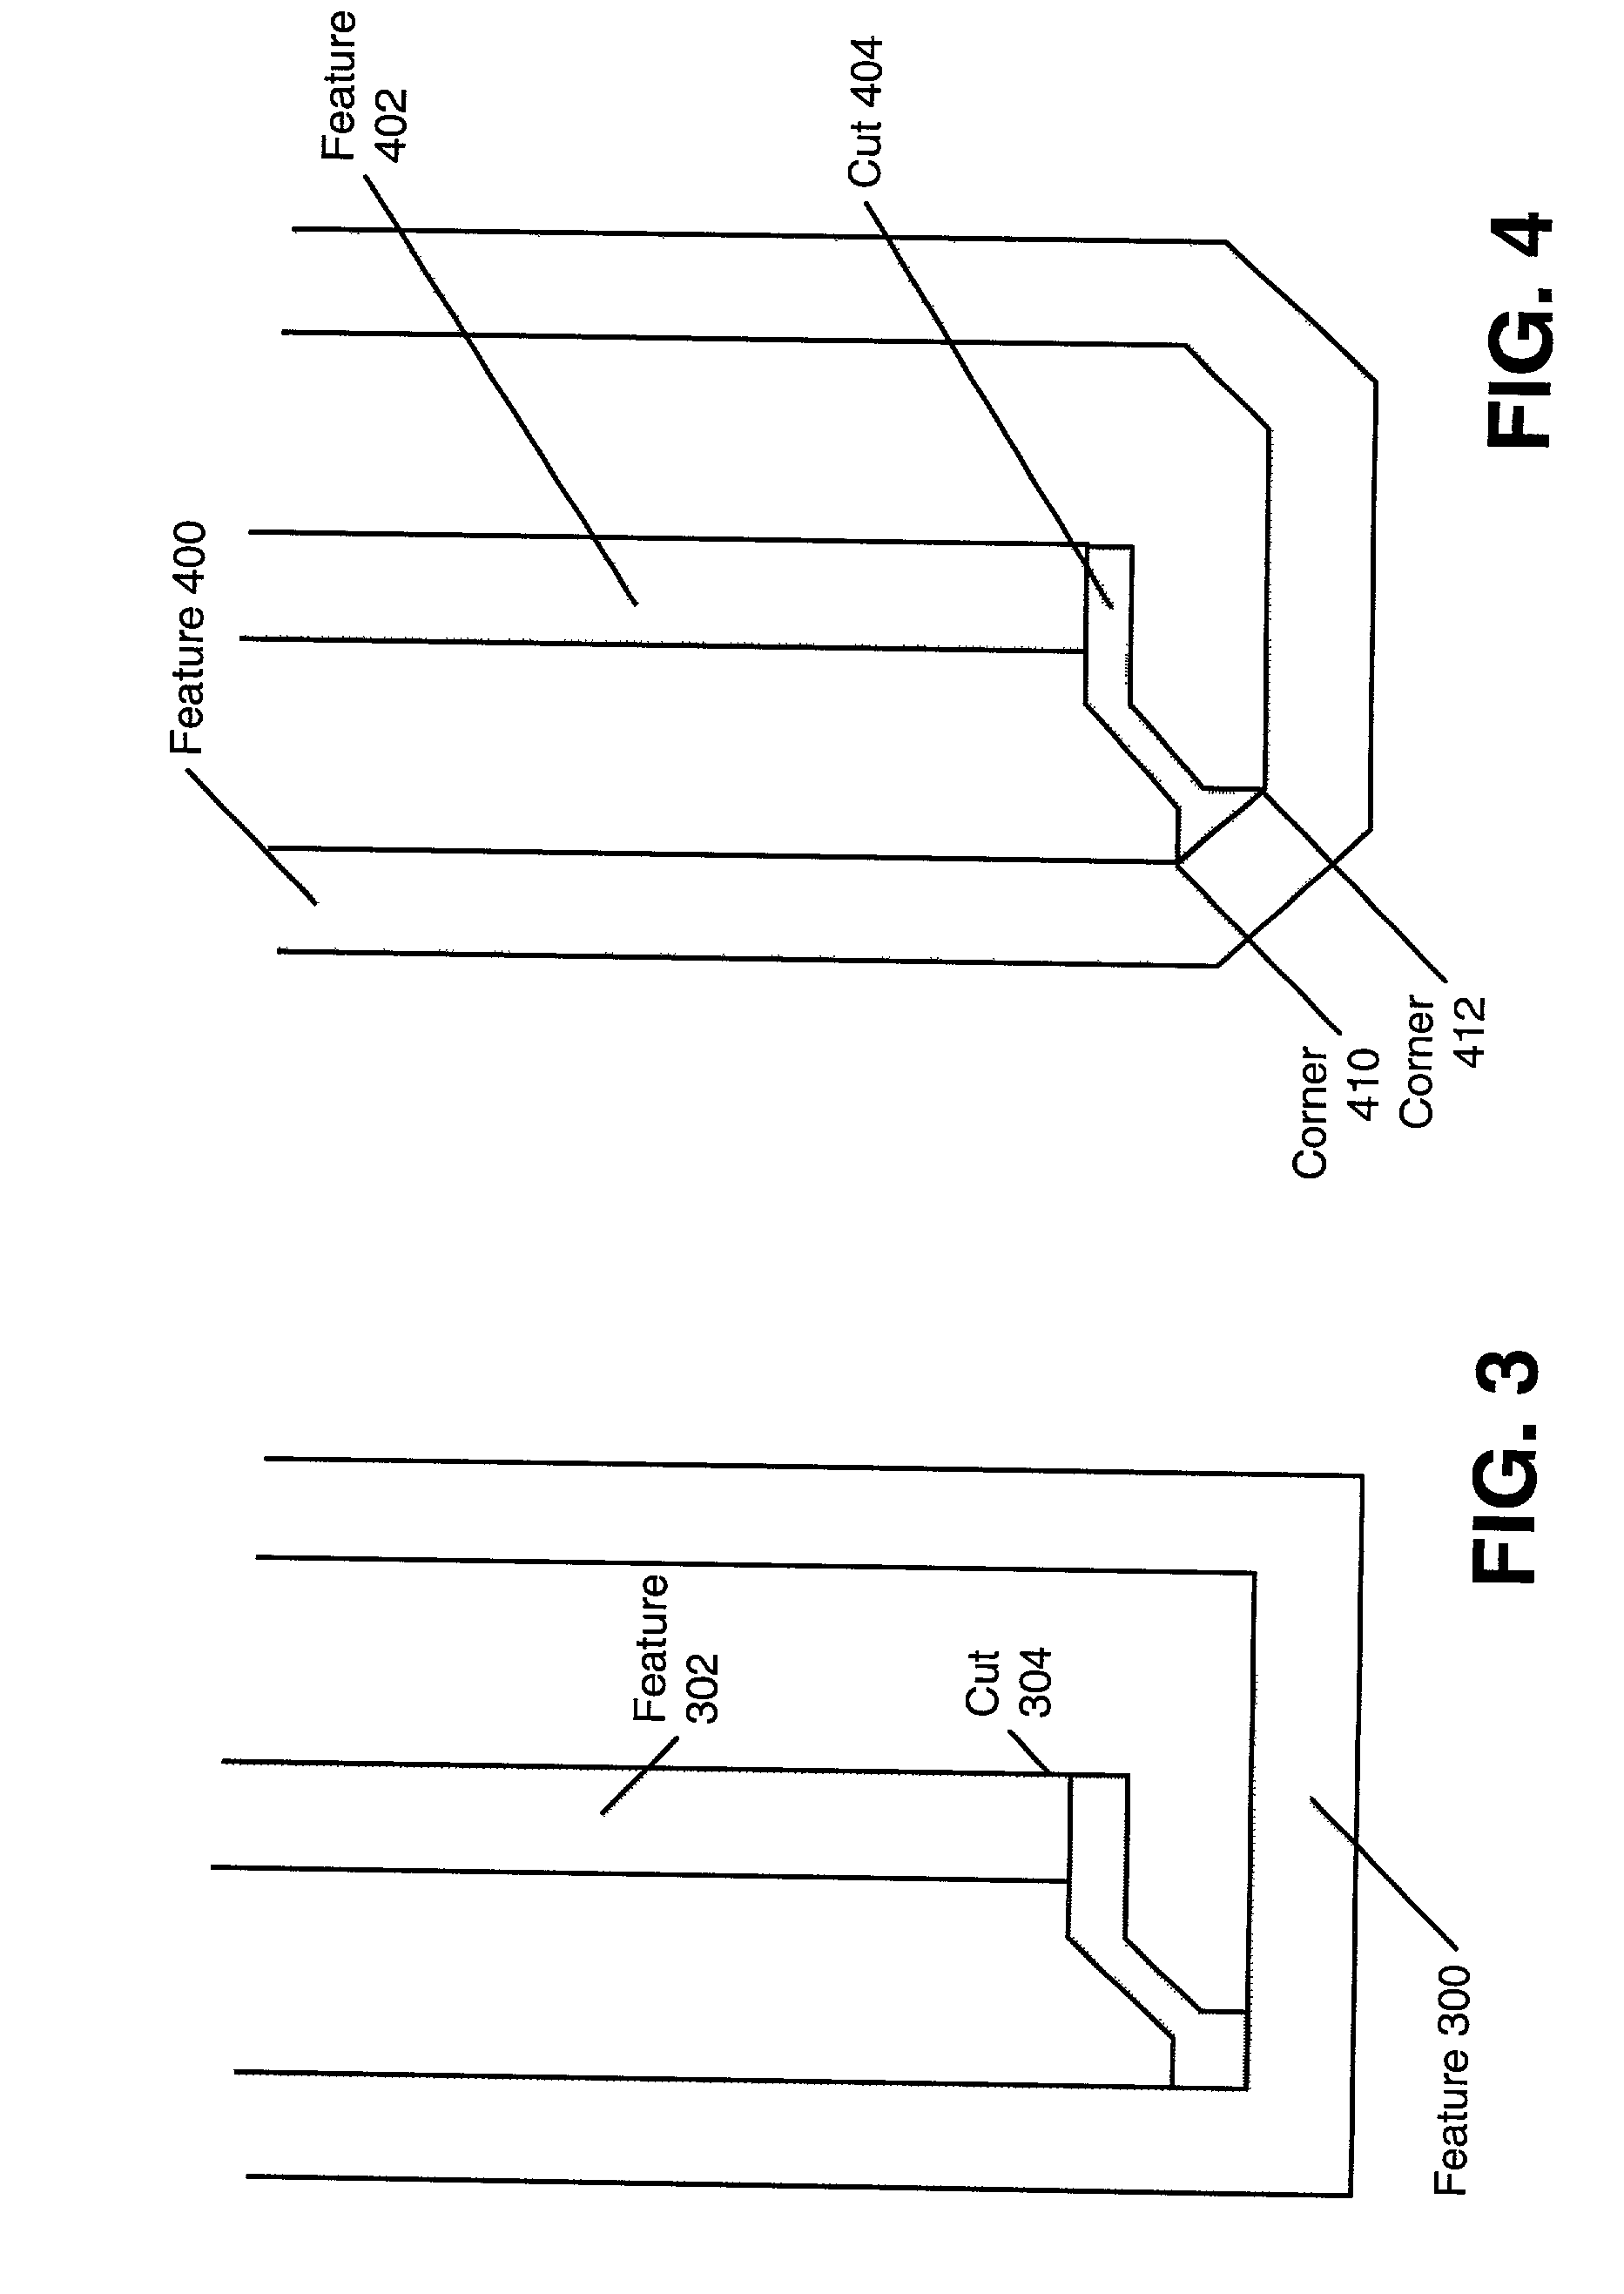 Phase shifting design and layout for static random access memory